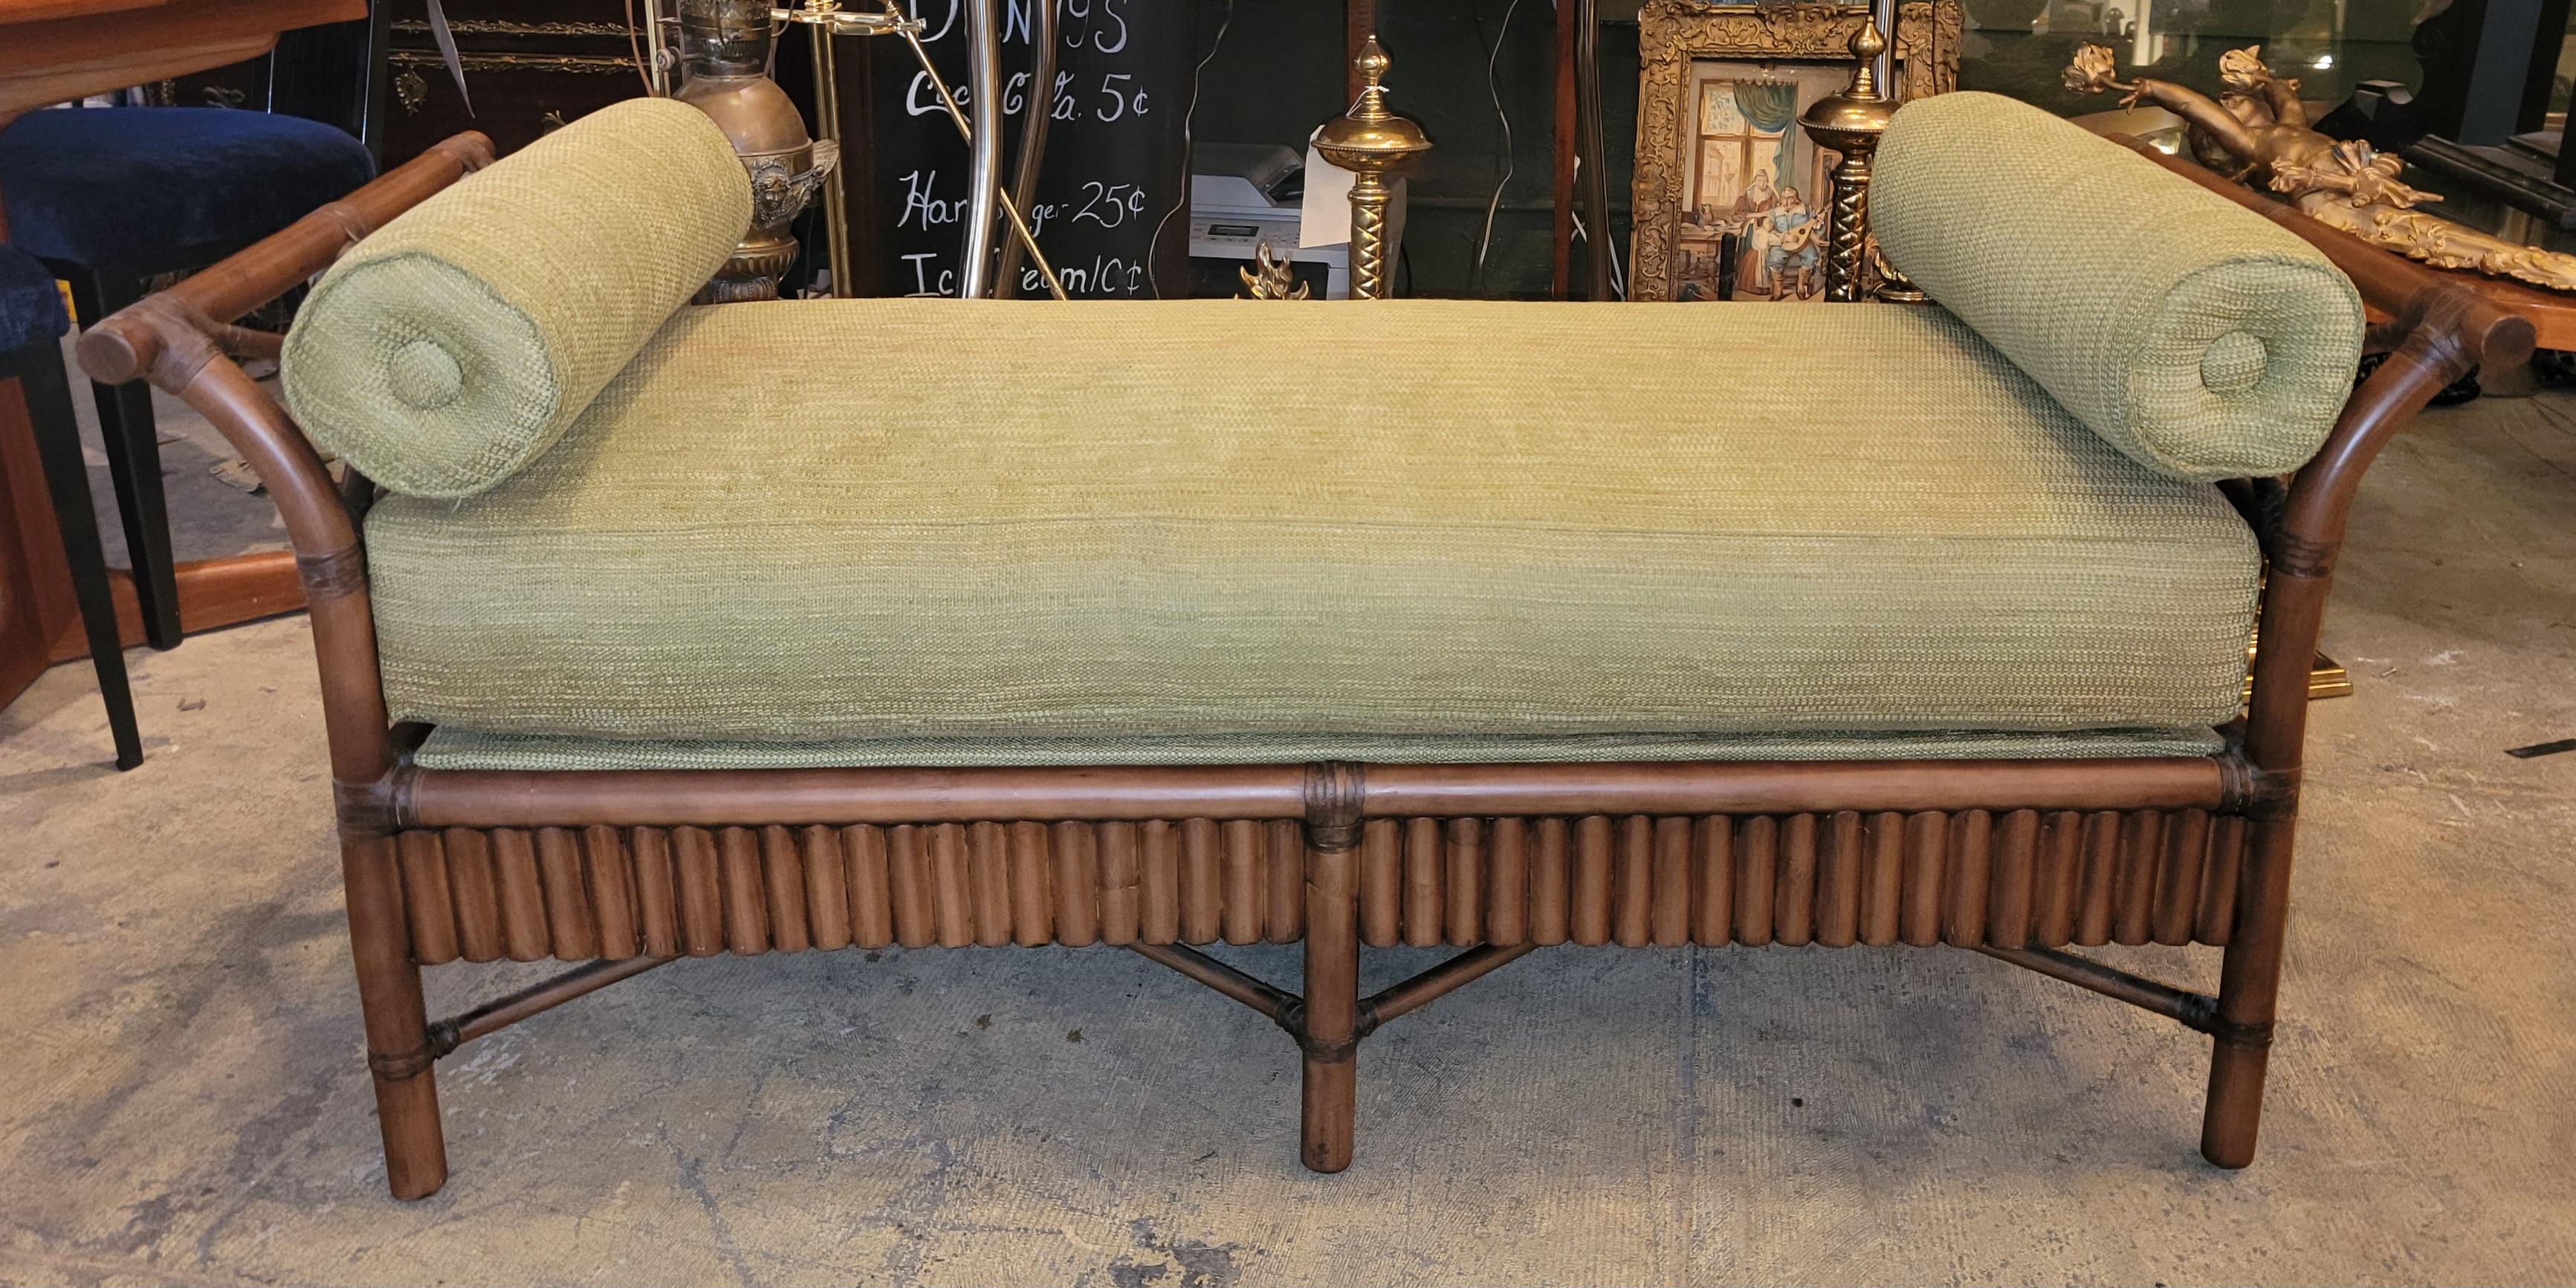 Wonderful day bed with bamboo structure and rattan webbing. 
The cushion is custom made for this daybed and fits snug into the frame. 
There are 2 cylindrical kidney pillows that go with this daybed made in matching fabric.